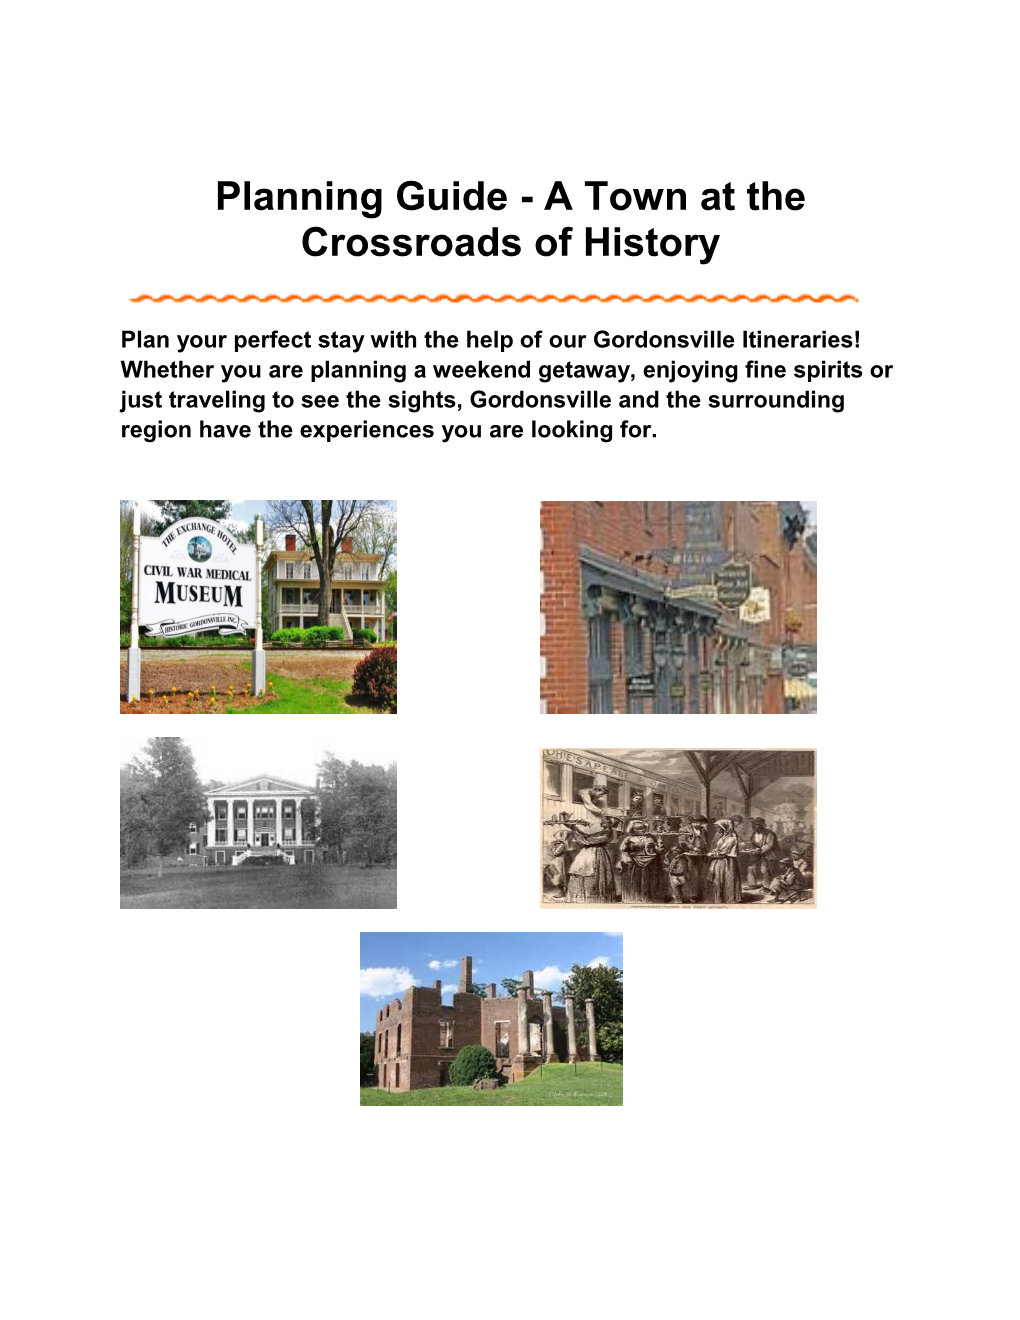 Planning Guide - a Town at the Crossroads of History